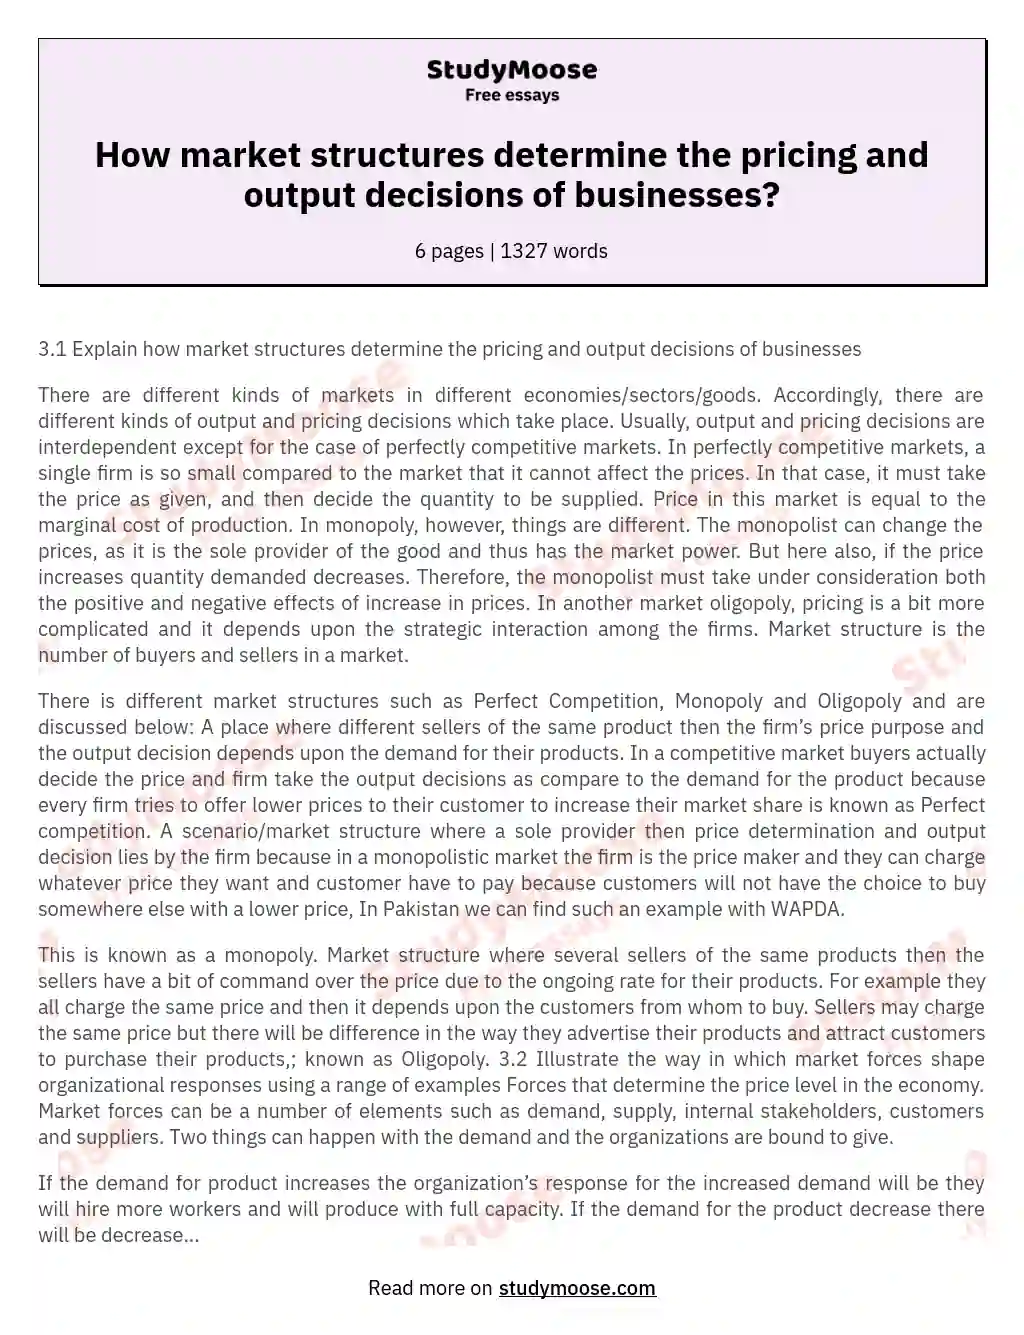 How market structures determine the pricing and output decisions of businesses? essay